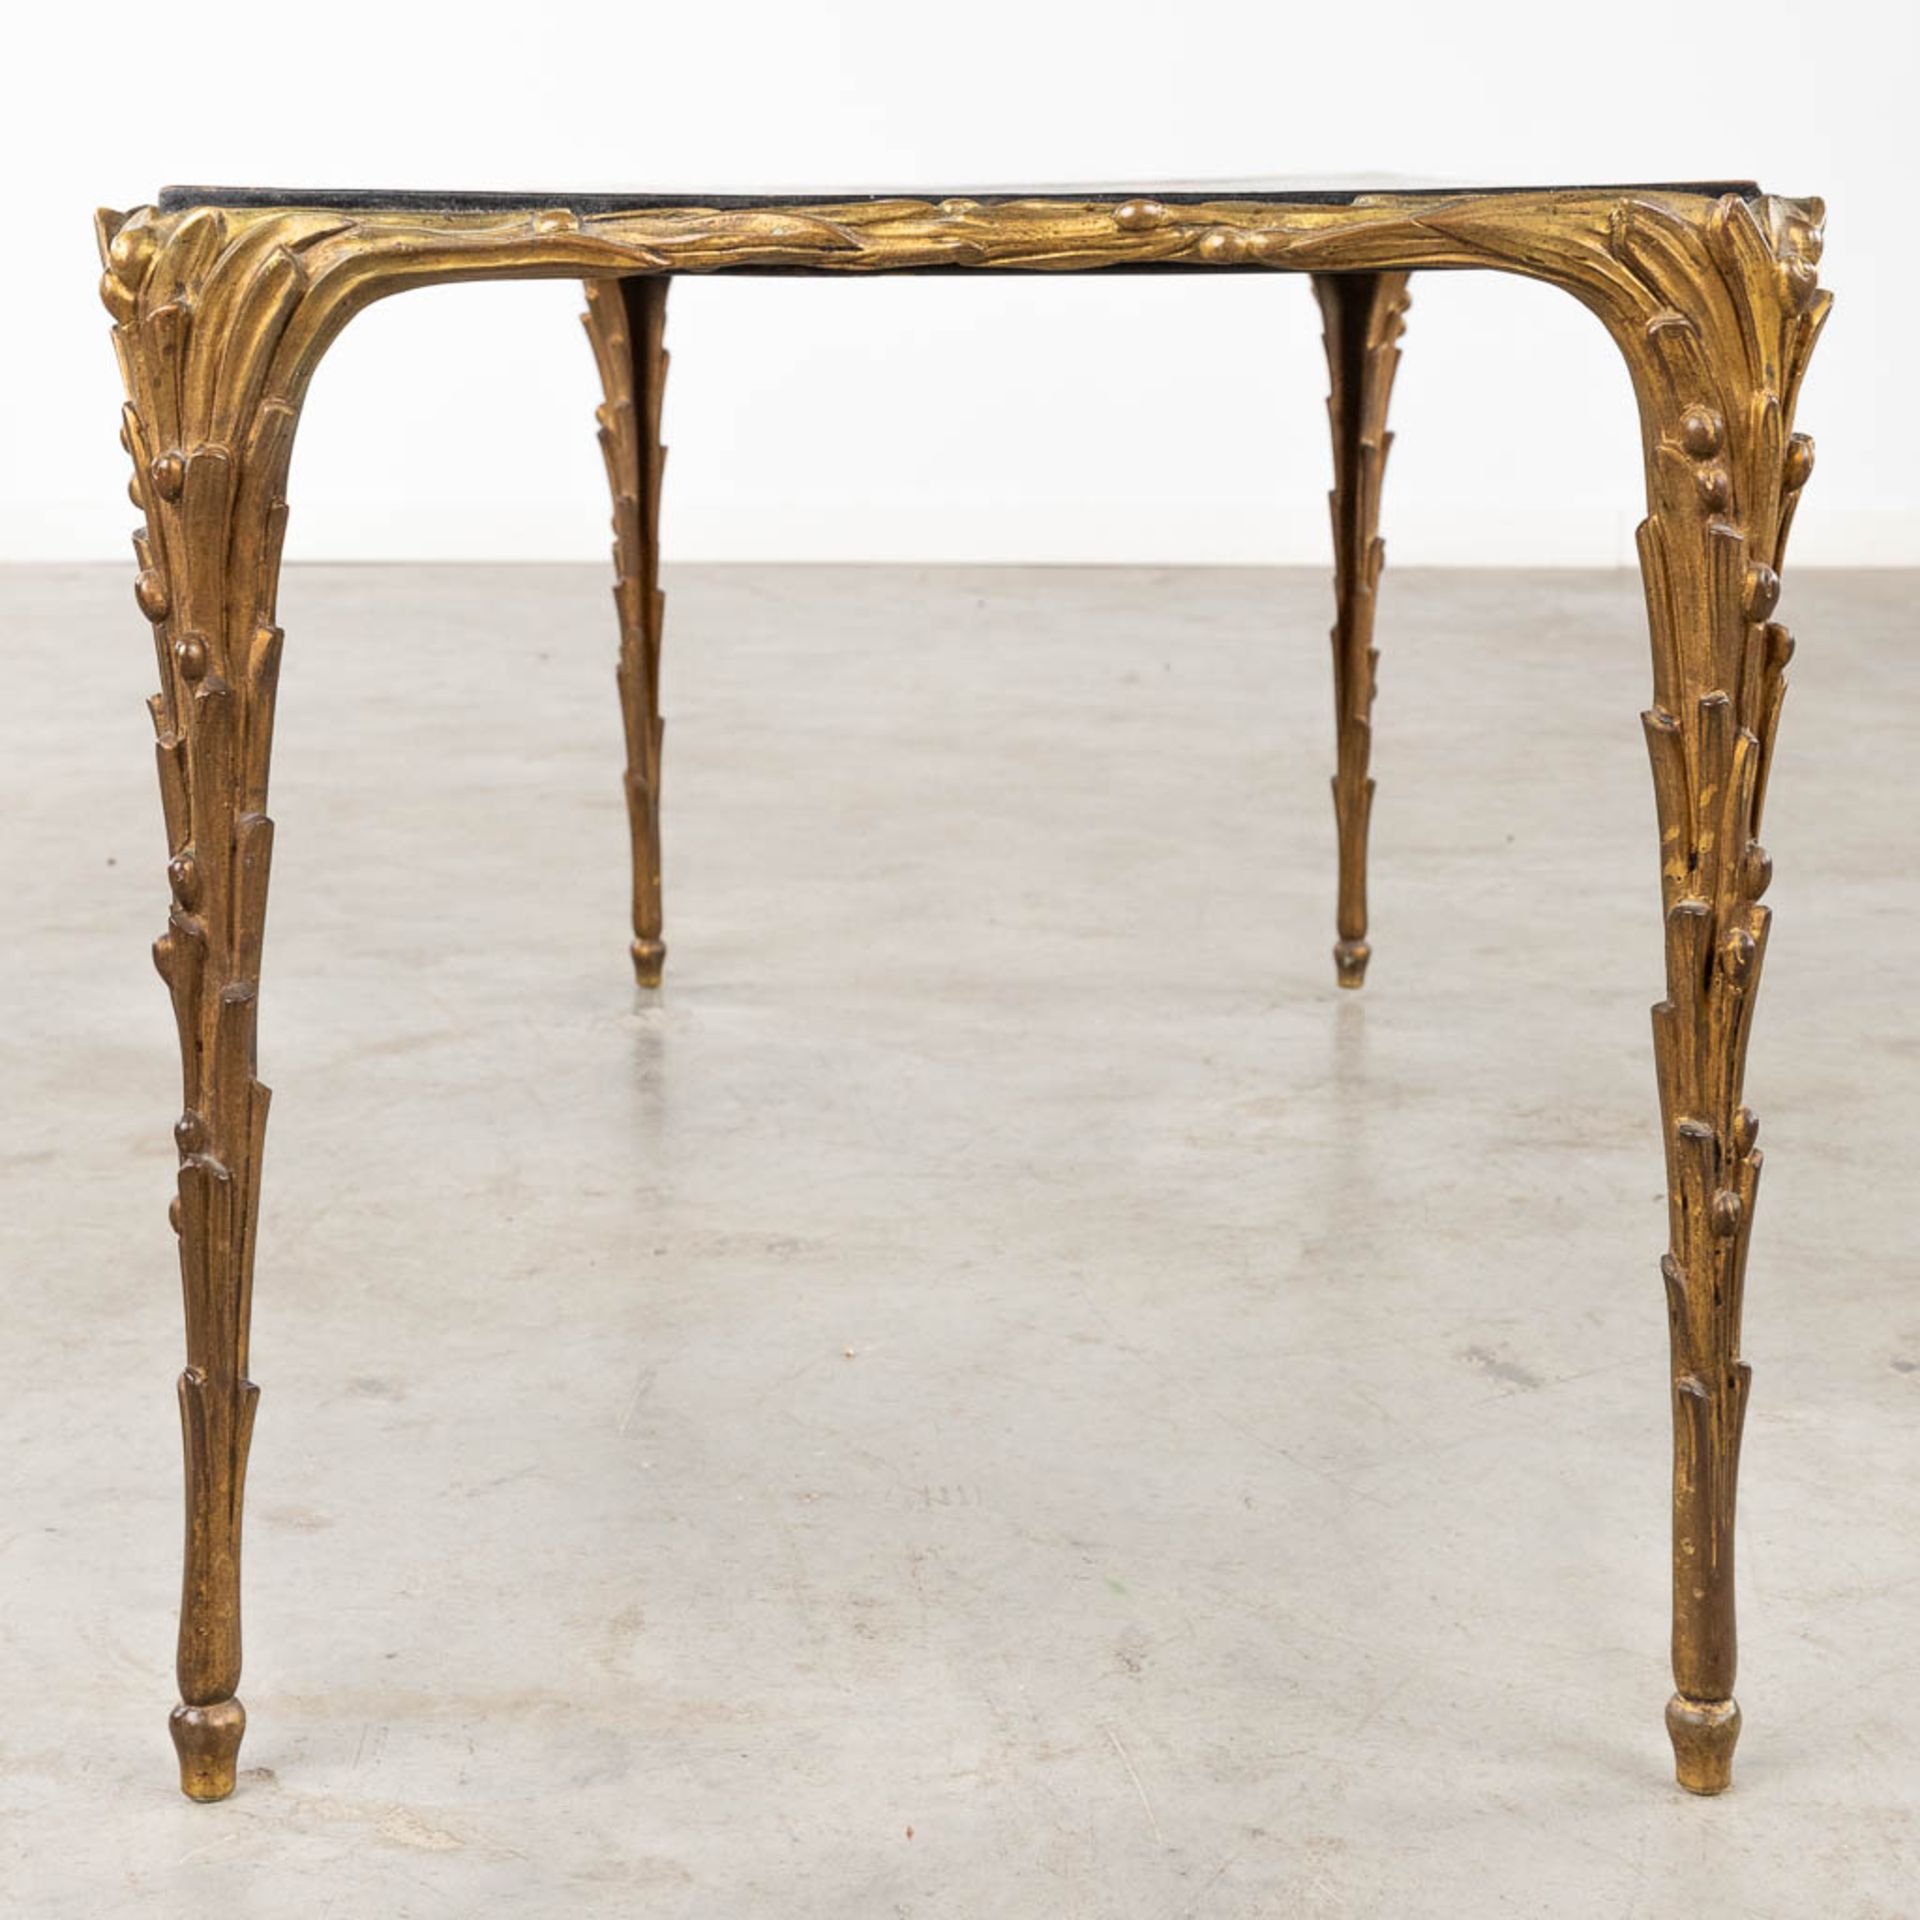 Maison Bagues 'Mid-Century Coffee Table' with lacquered Chinoiserie decor. (D:43 x W:100 x H:42 cm) - Image 5 of 20